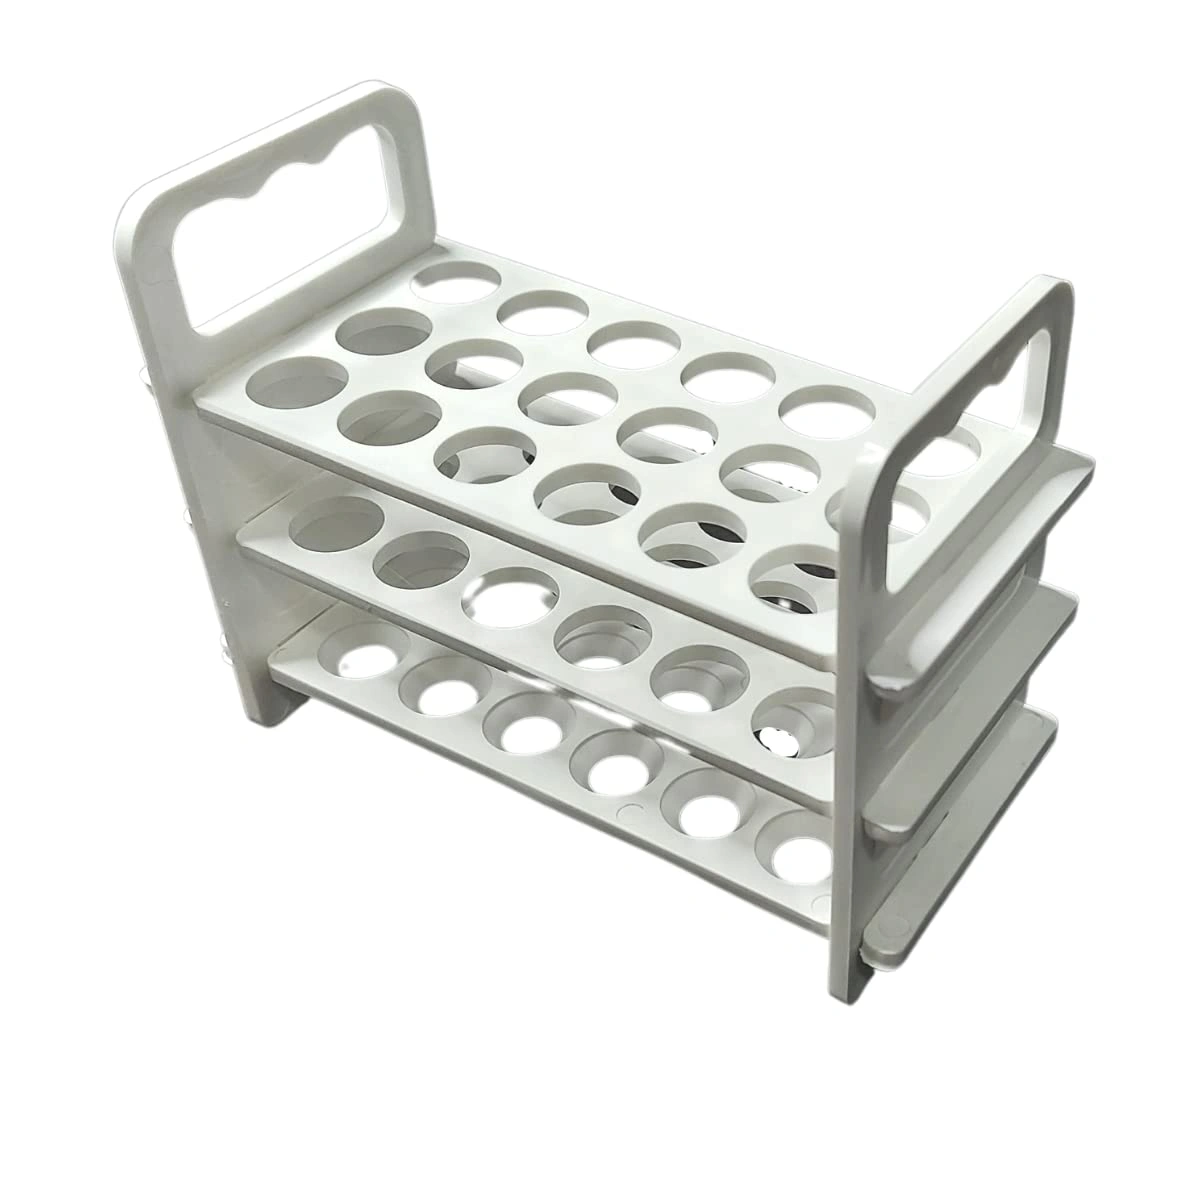 Test tube stand 3 TIER: 15mm × 18 Holes-1